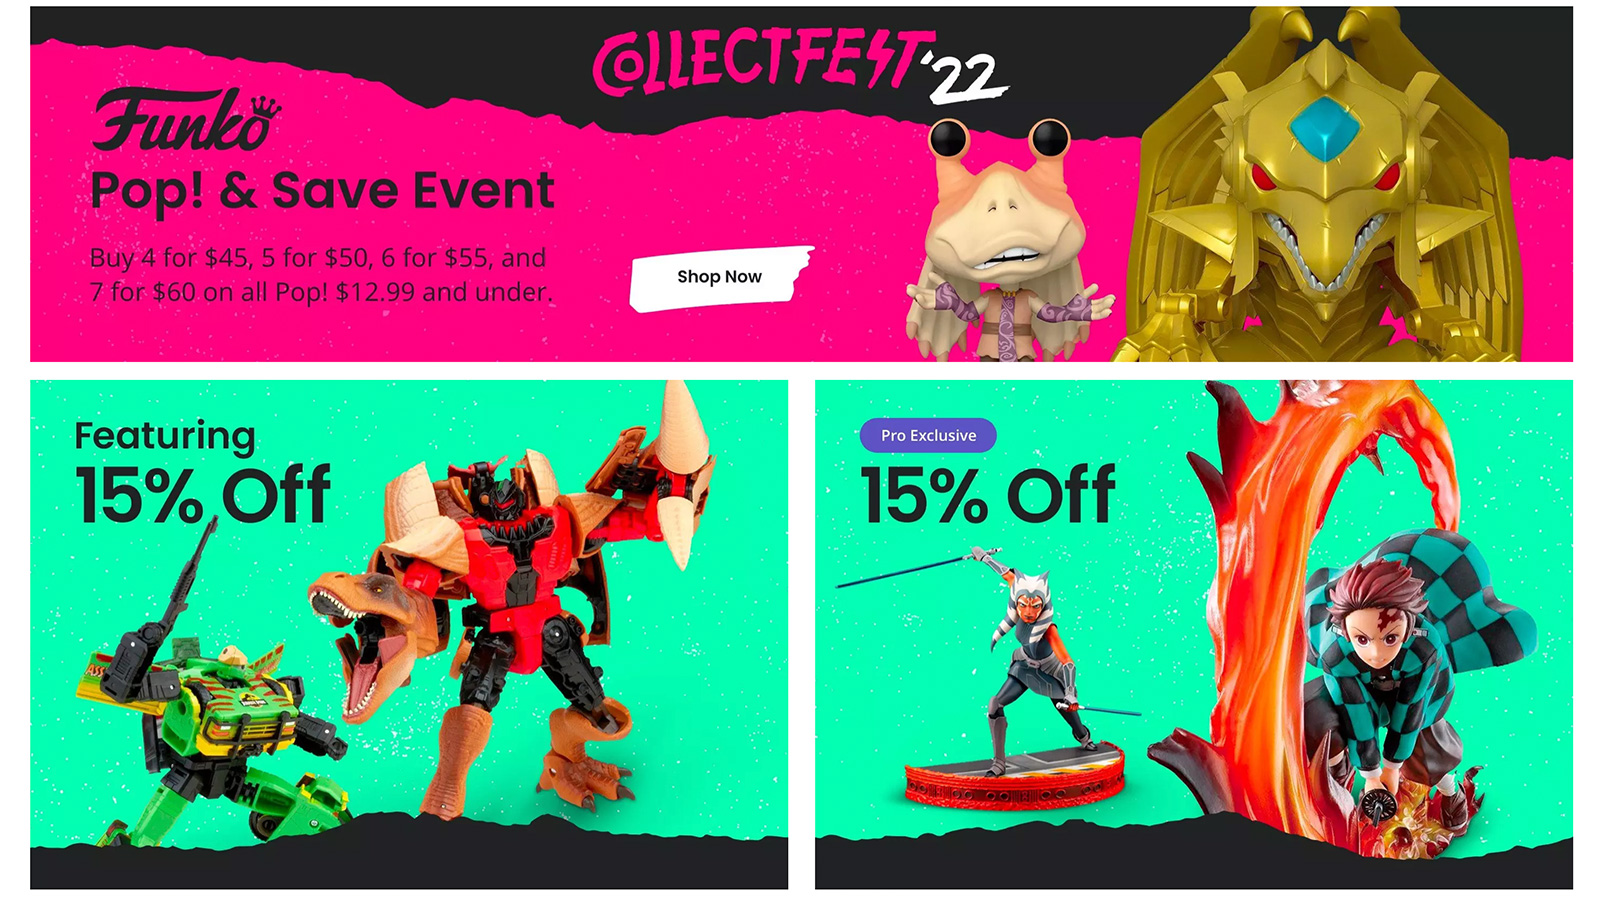 GameStop.Com Collectfest 22 - Daily Reveals All Week, 10% Or 15% Off Select Products And Funko POP! Deals As Well